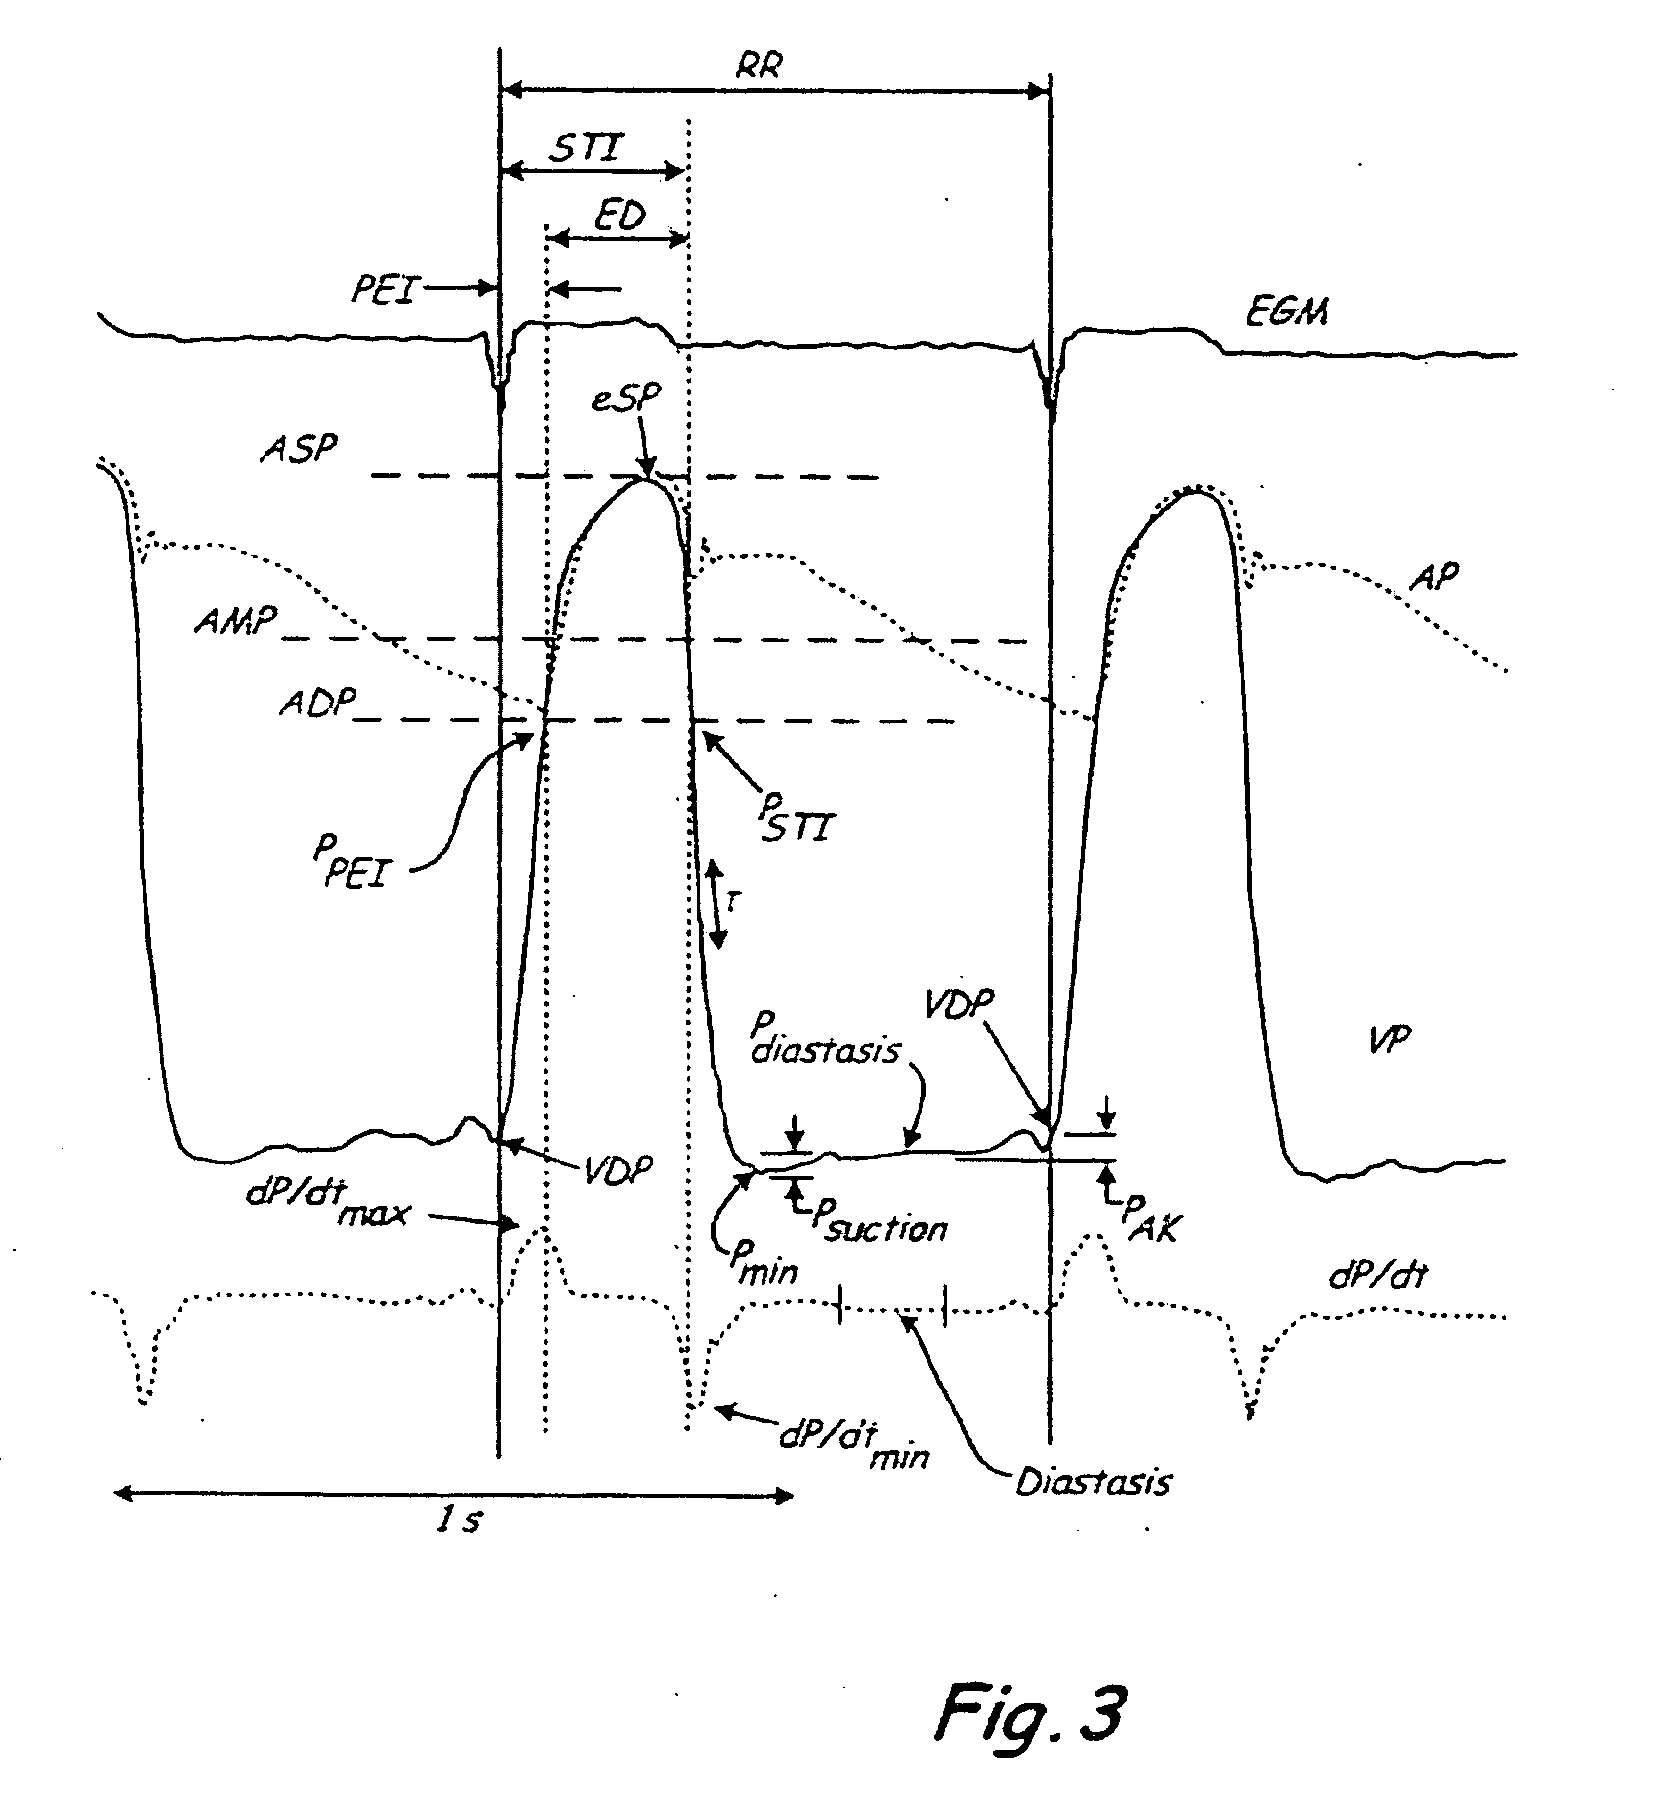 System and method of determining arterial blood pressure and ventricular fill parameters from ventricular blood pressure waveform data